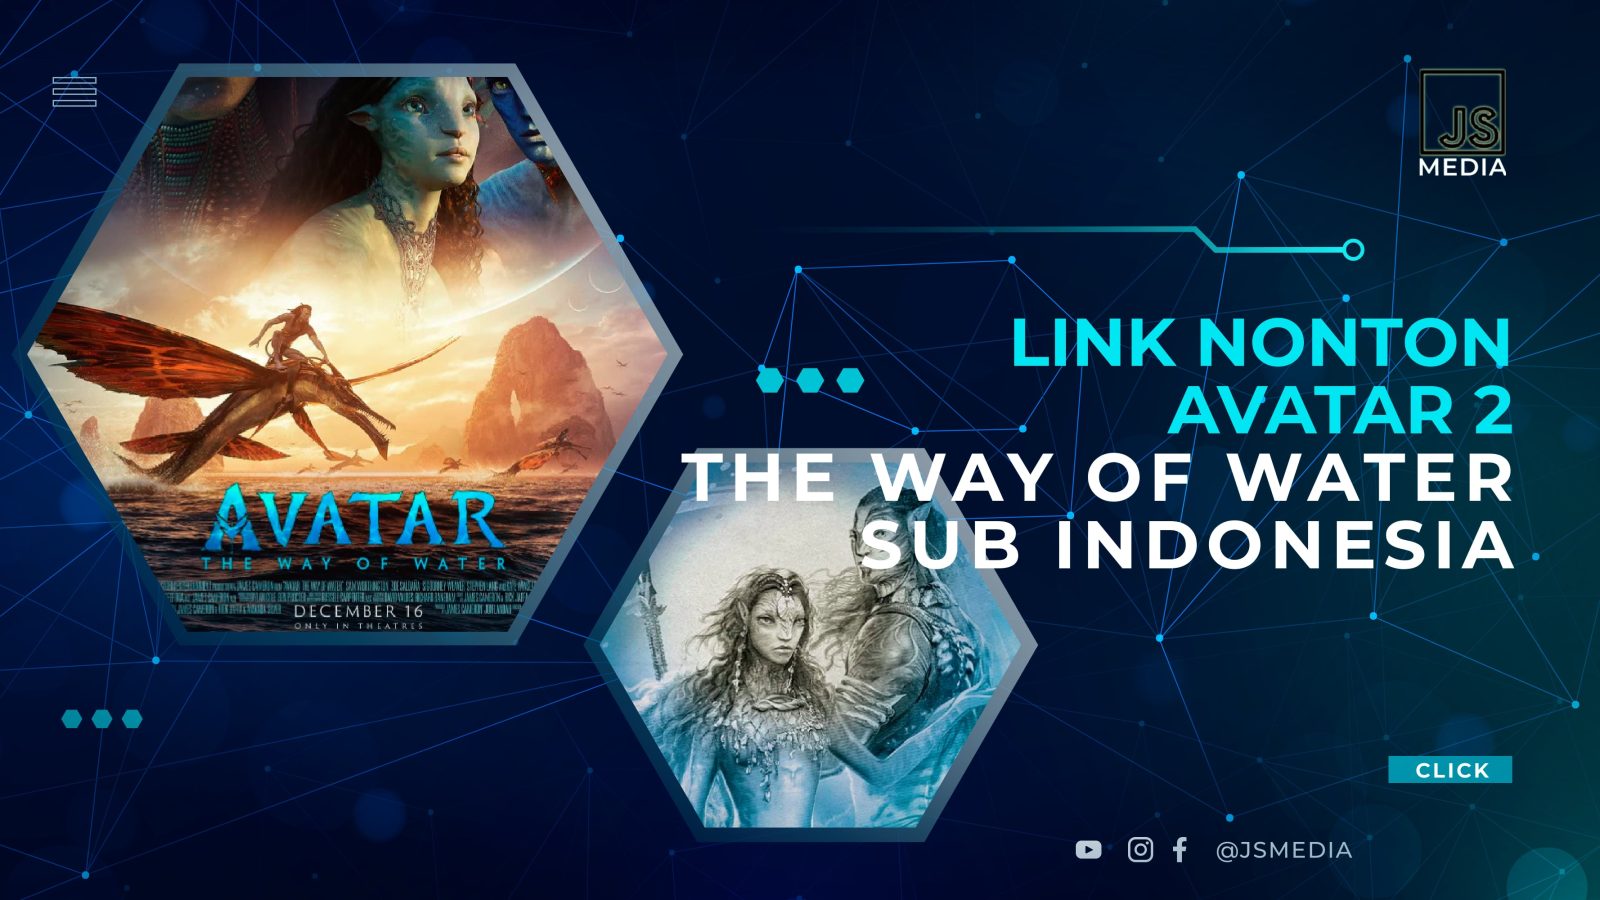 Link Nonton Avatar 2: The Way of Water